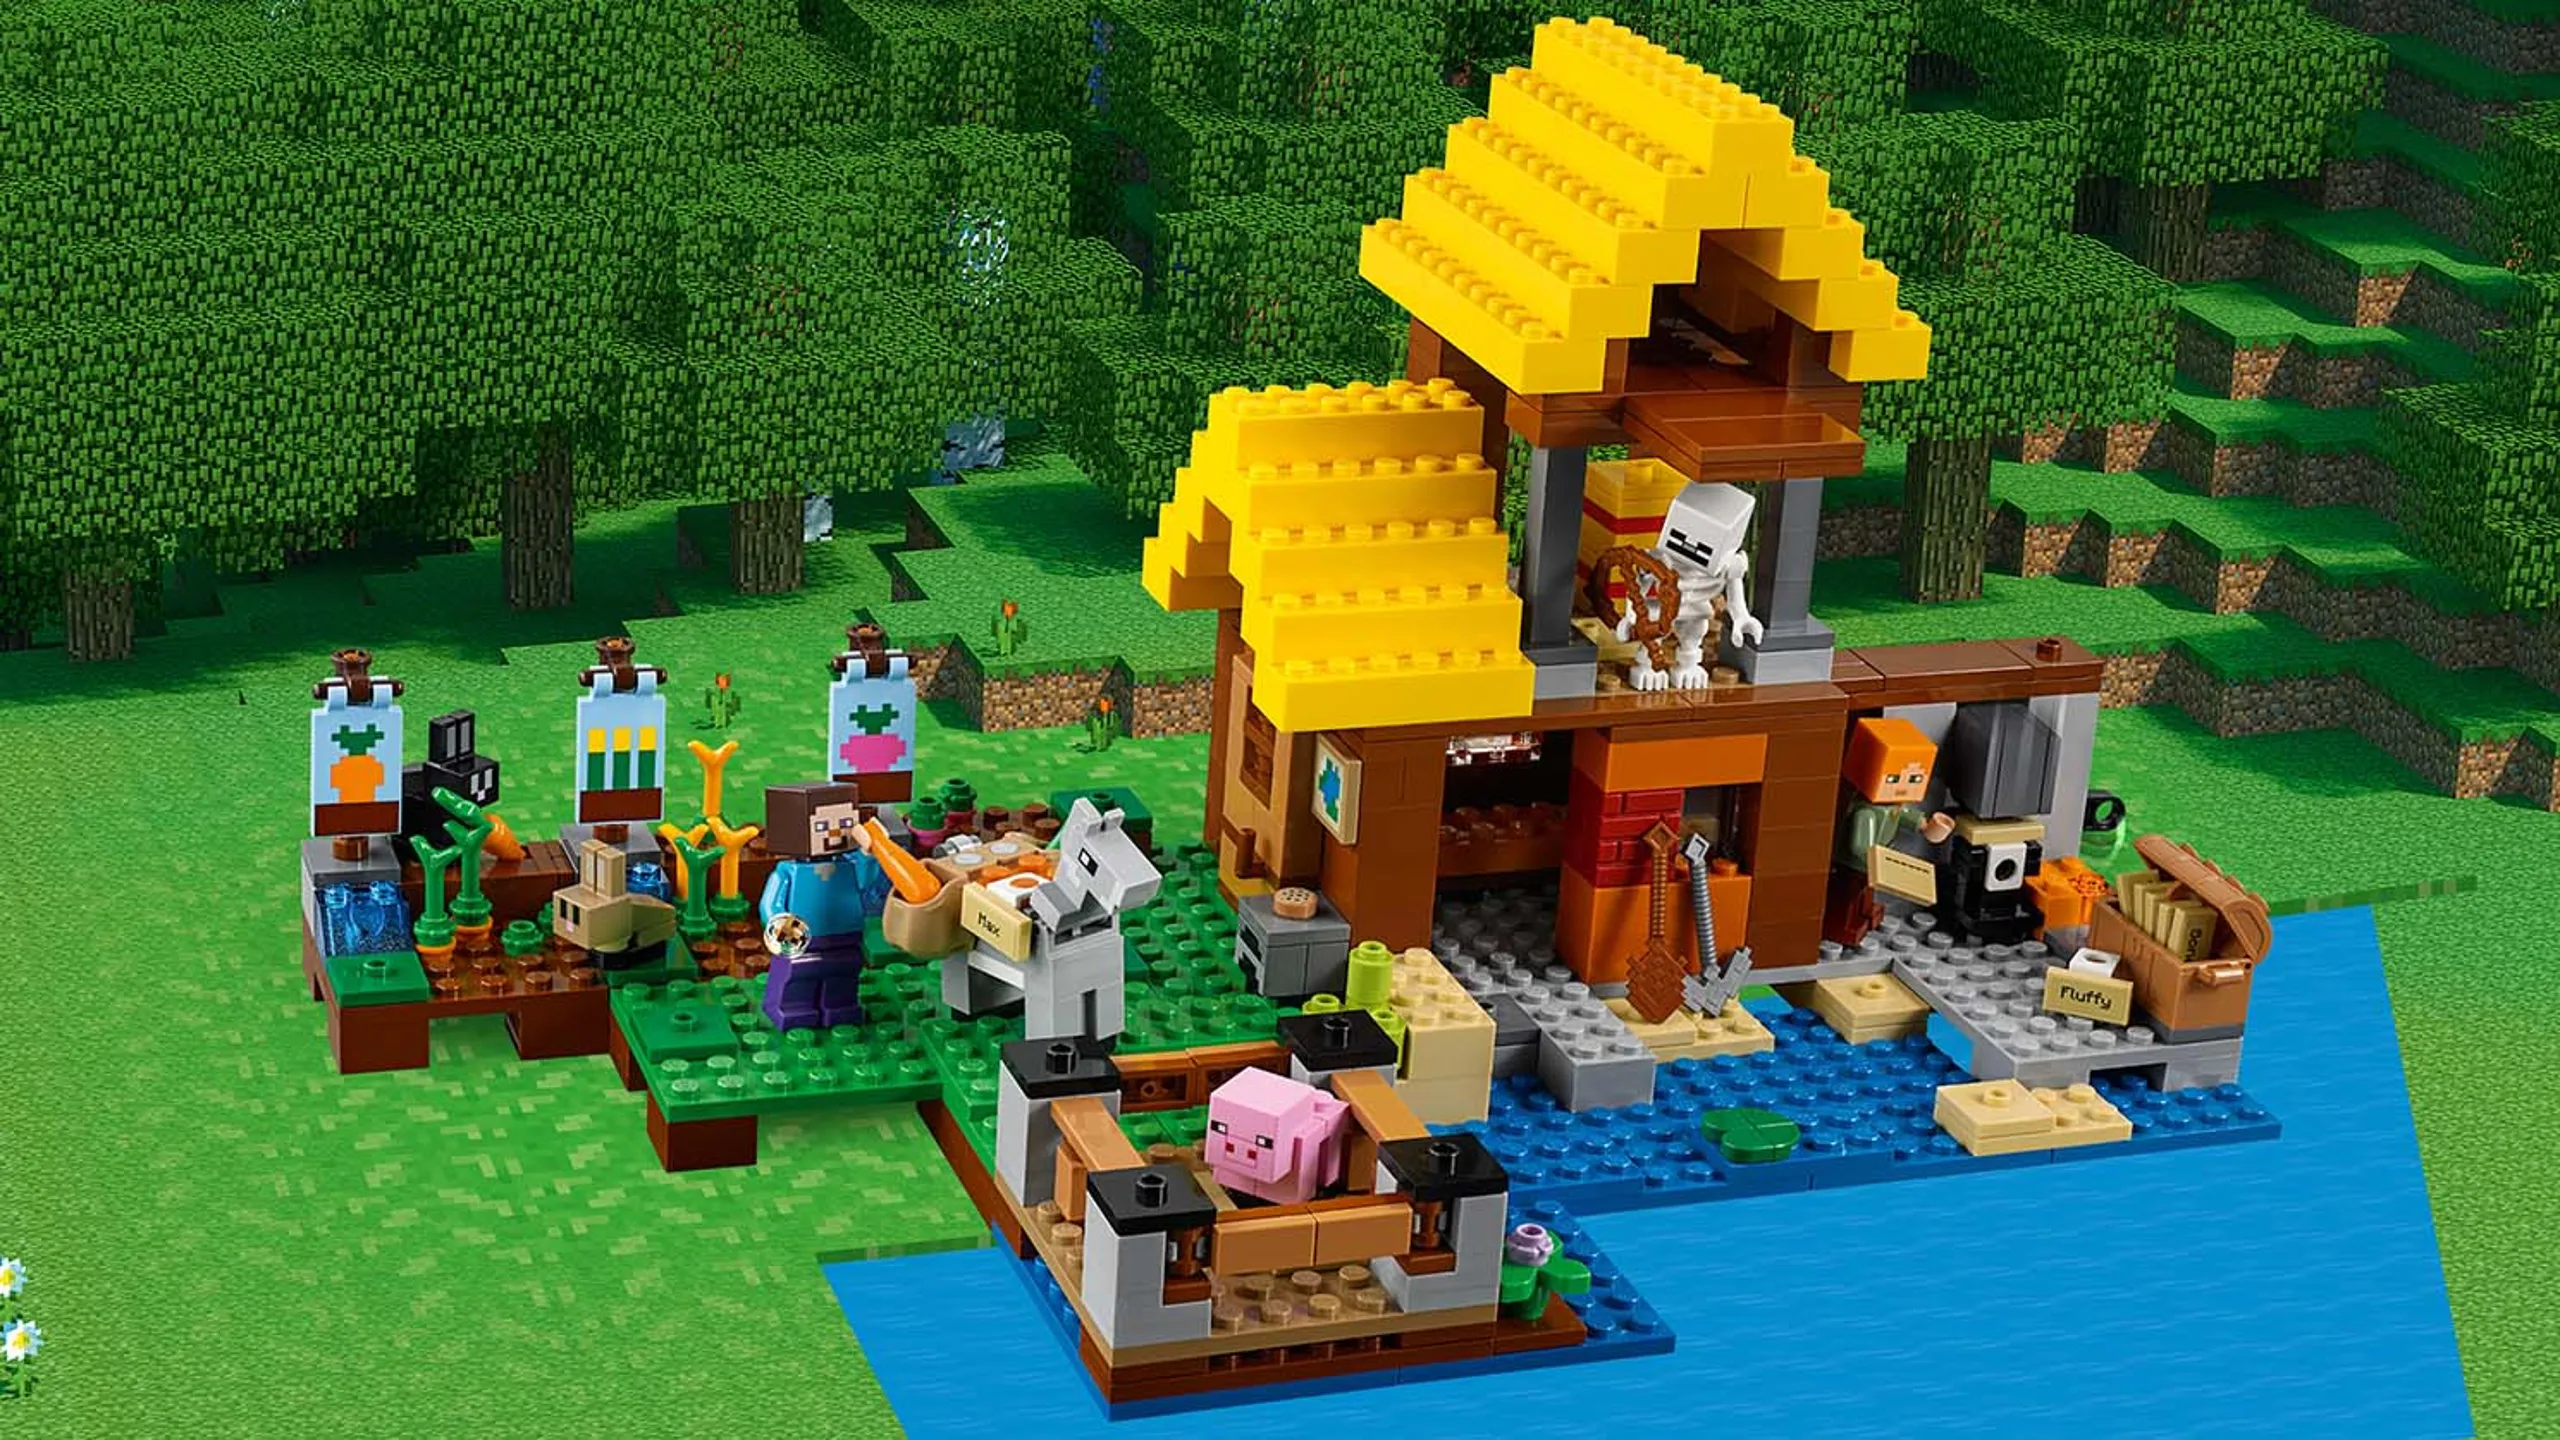 LEGO Minecraft - 21144 The Farm Cottage - Steve and Alex have build a big farm with a thatched roof where they grow lost of crops that they must protect from the hungry rabbits and they also have a donkey and a baby pig at their farm.